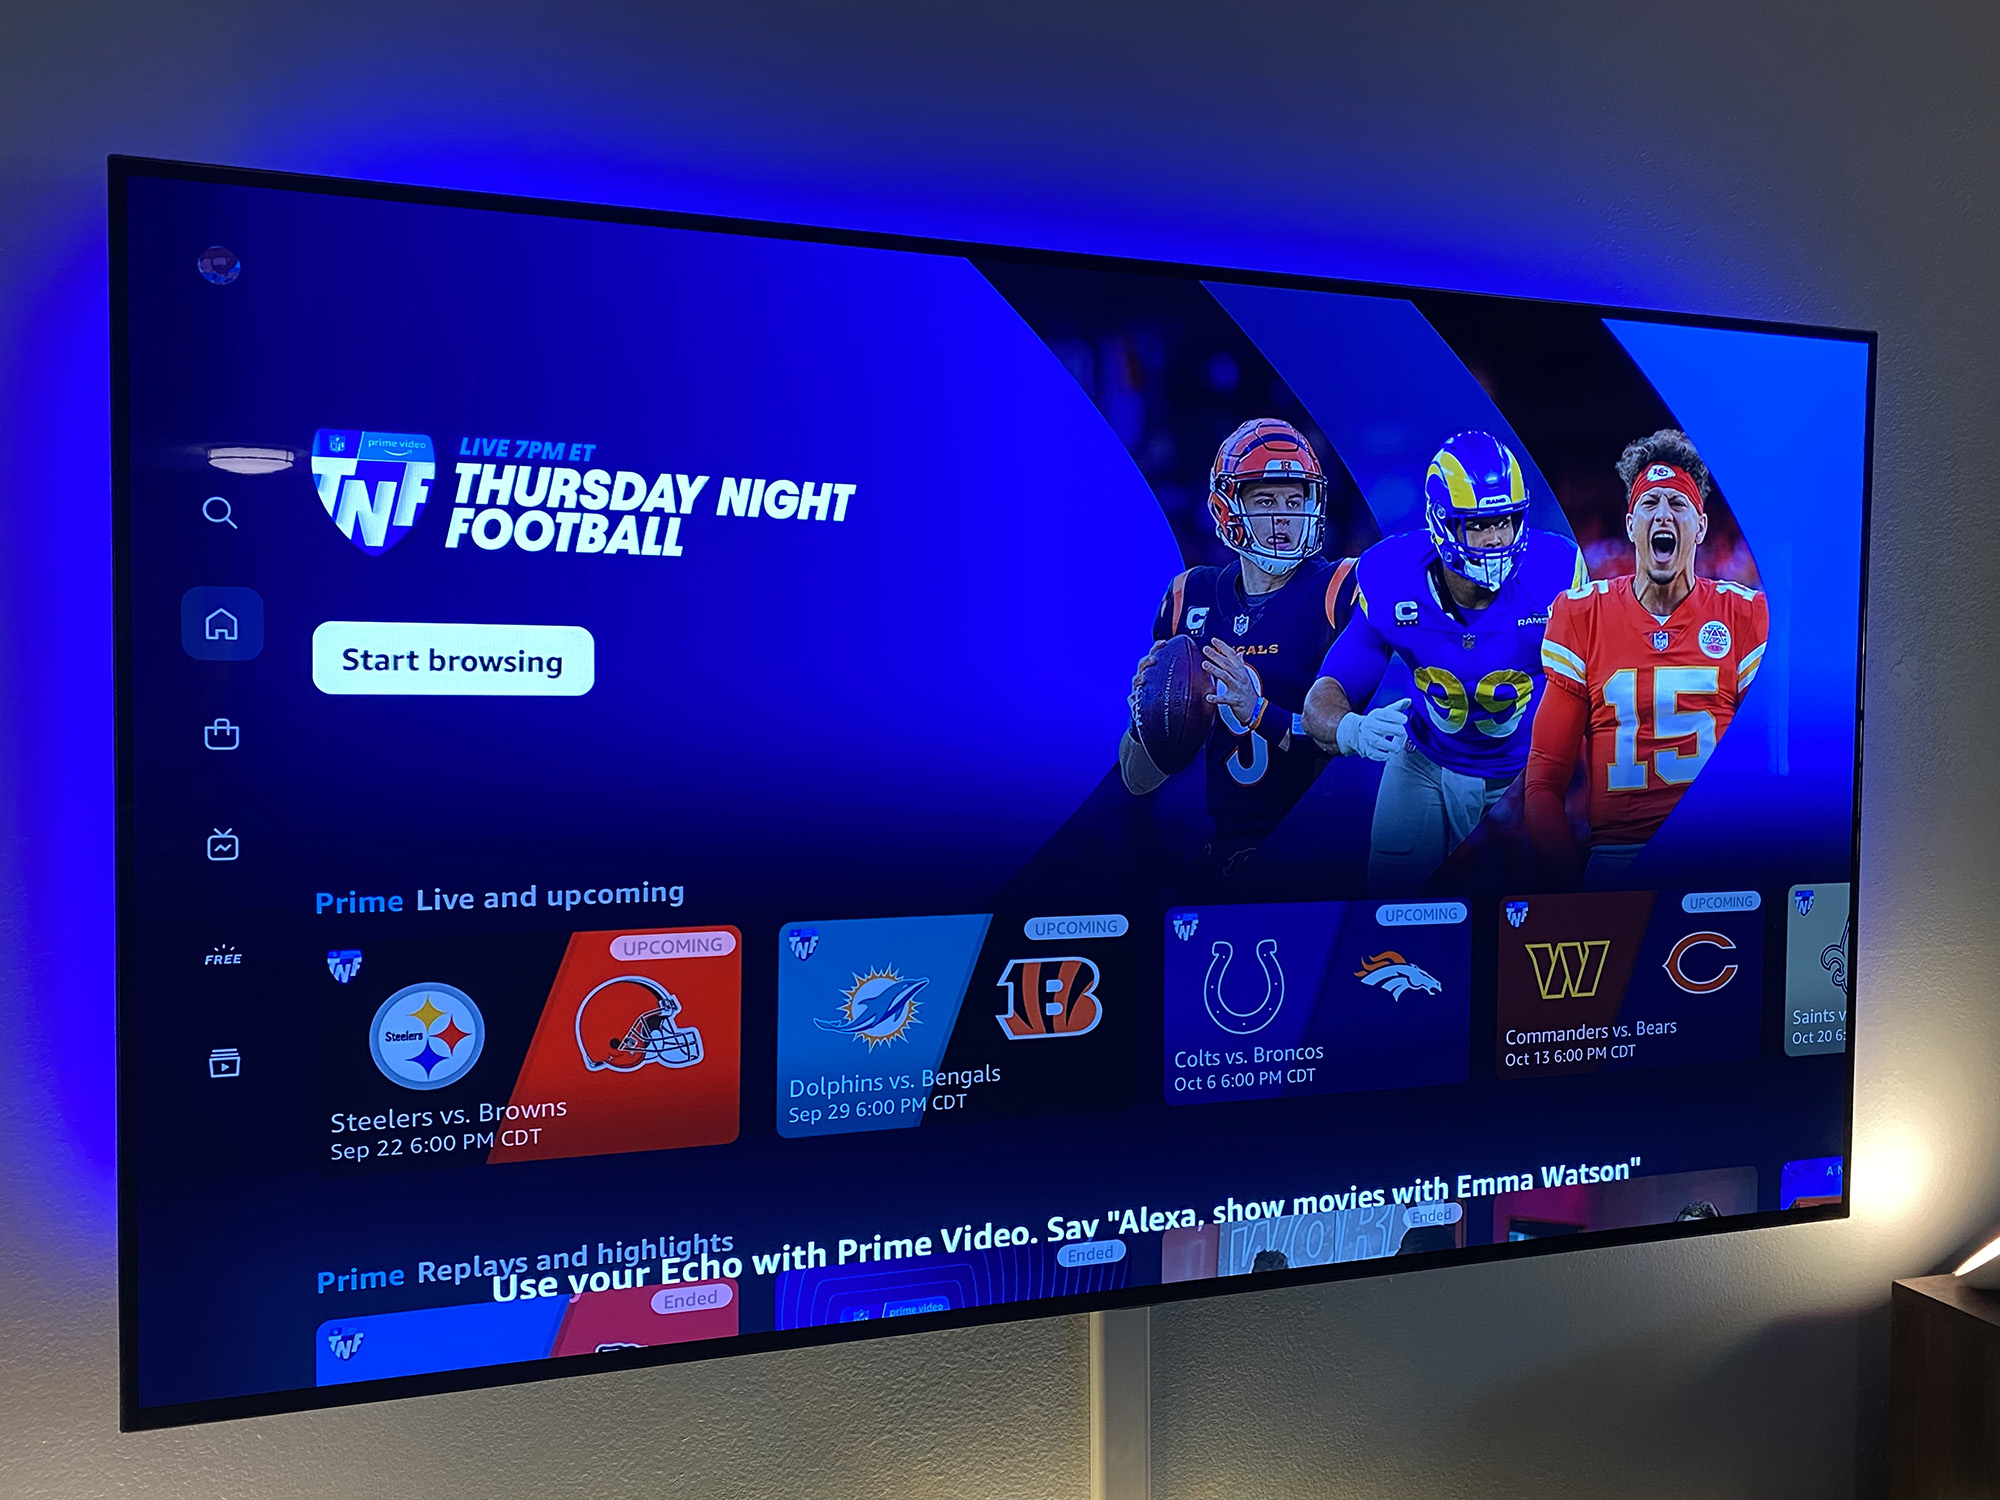 Prime Video's Thursday Night Football Schedule Announced